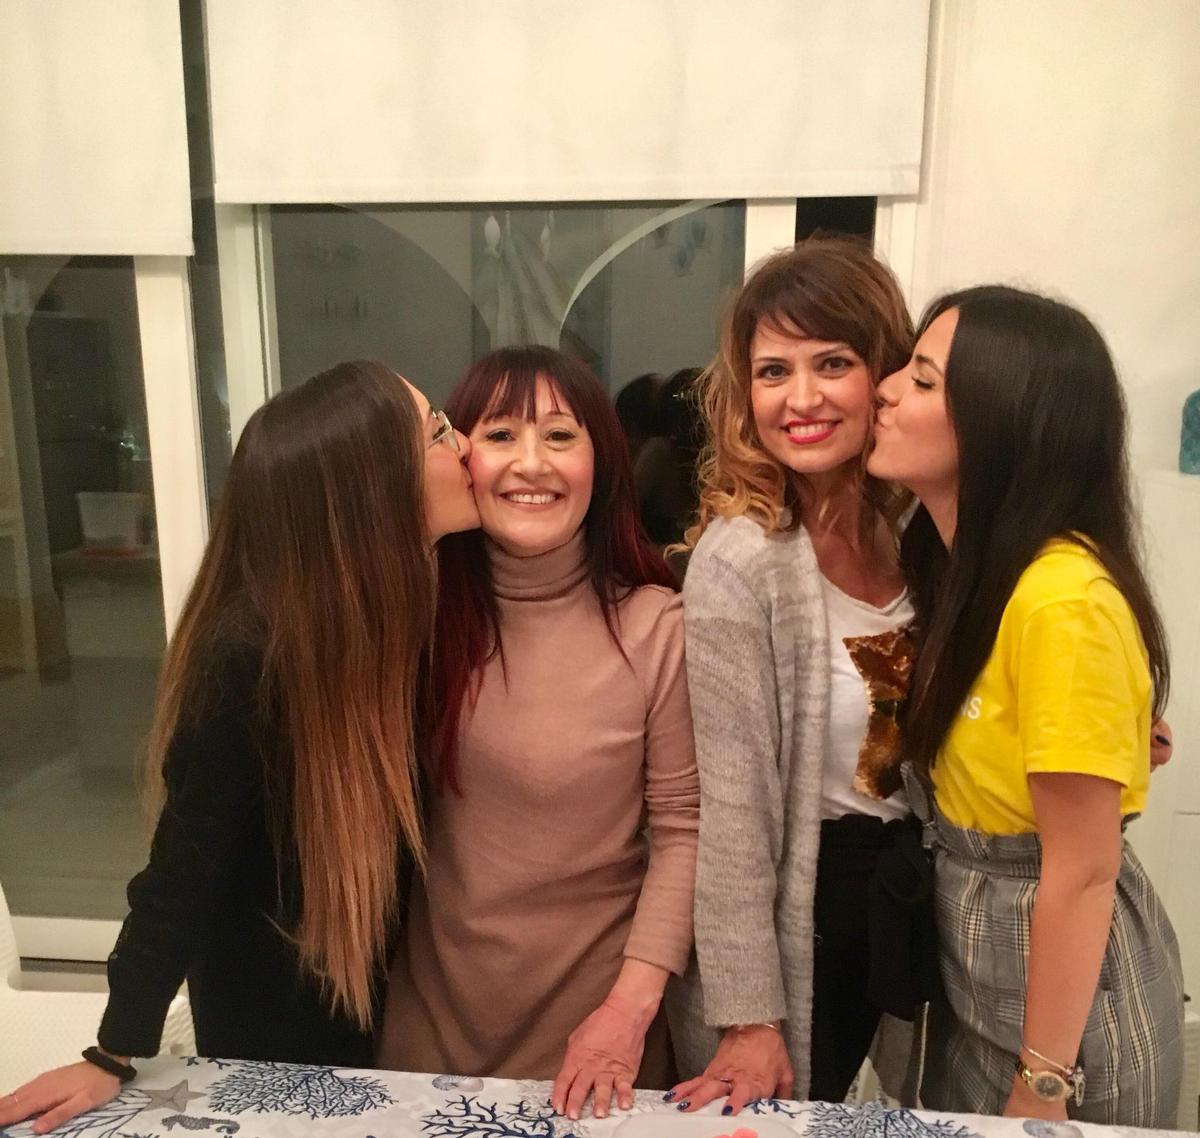 Caterina (L) with her biological mother, Marinella; and Melissa (R) with her biological mother, Gisella. (Courtesy of Caterina Alagna)